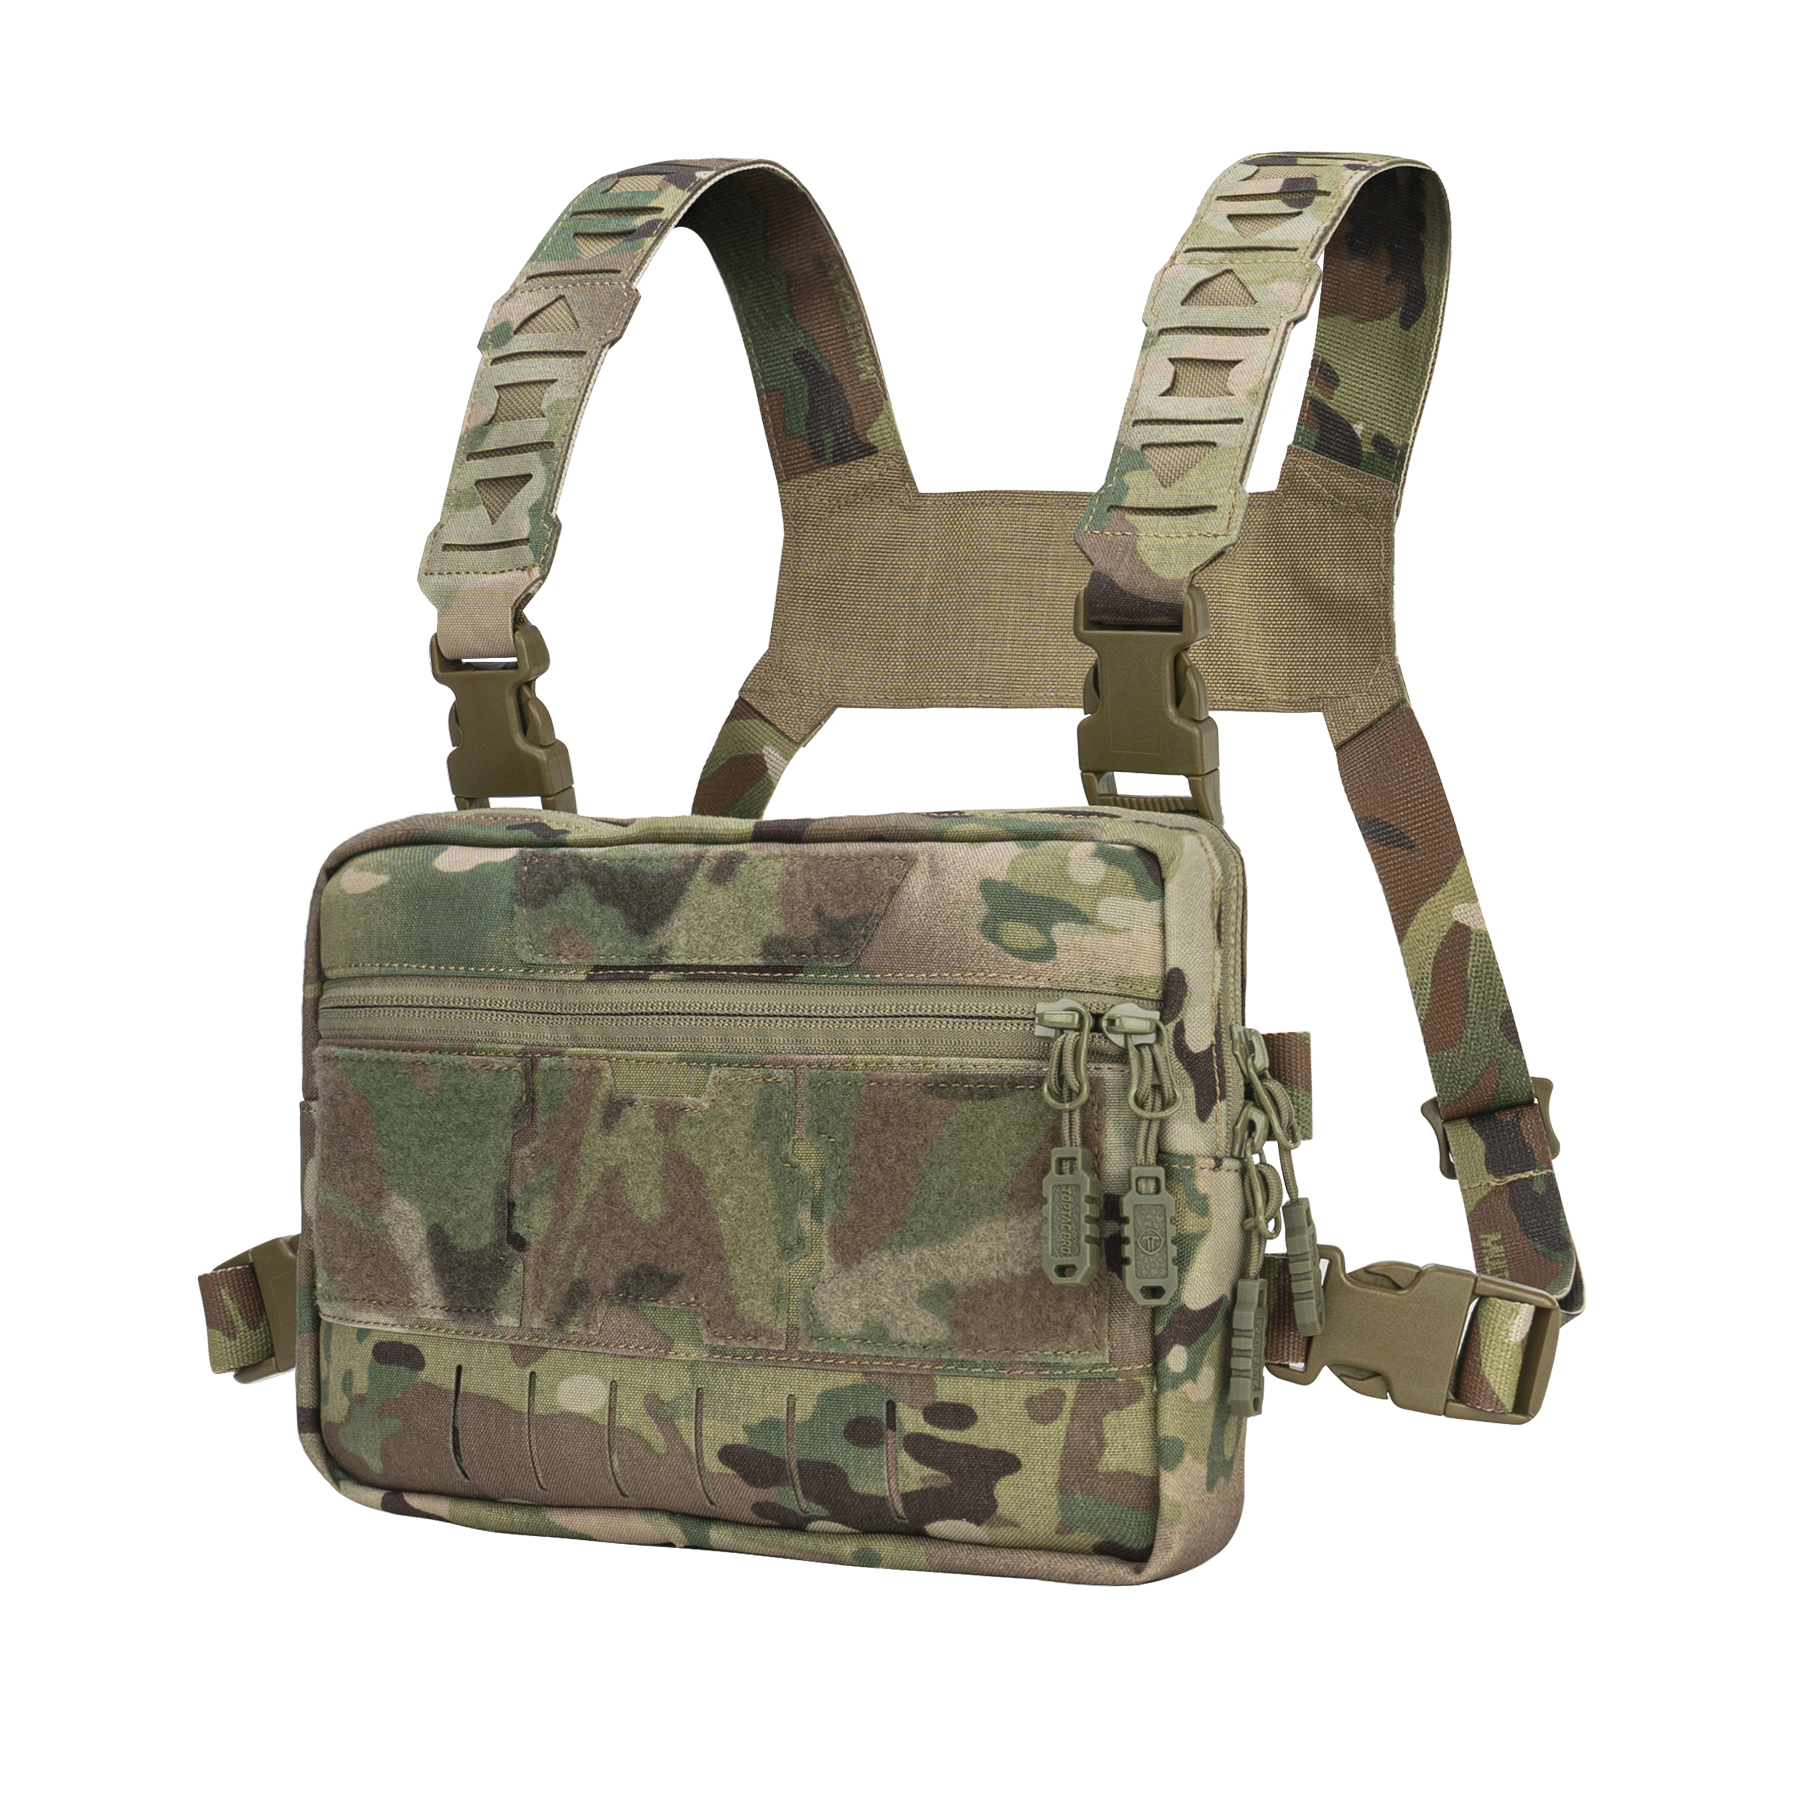 TOPTACPRO Tatcical Chest Rig Bag Chest Recon Bag MOLLE Adjustable Shoulder Strap Pack 8511-IDOGEAR INDUSTRIAL